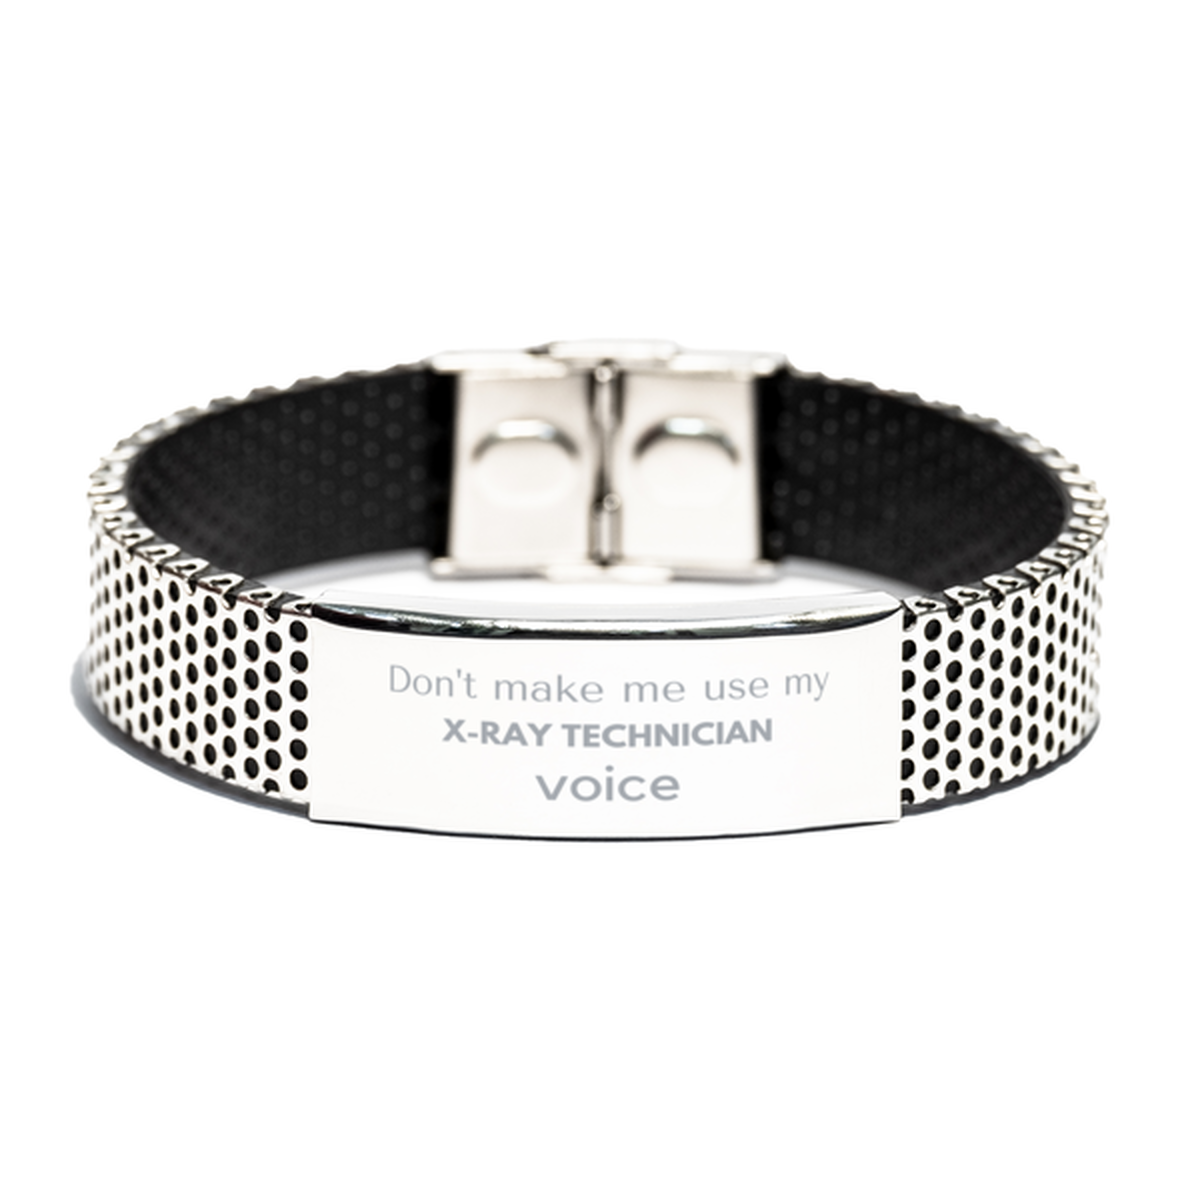 Don't make me use my X-Ray Technician voice, Sarcasm X-Ray Technician Gifts, Christmas X-Ray Technician Stainless Steel Bracelet Birthday Unique Gifts For X-Ray Technician Coworkers, Men, Women, Colleague, Friends